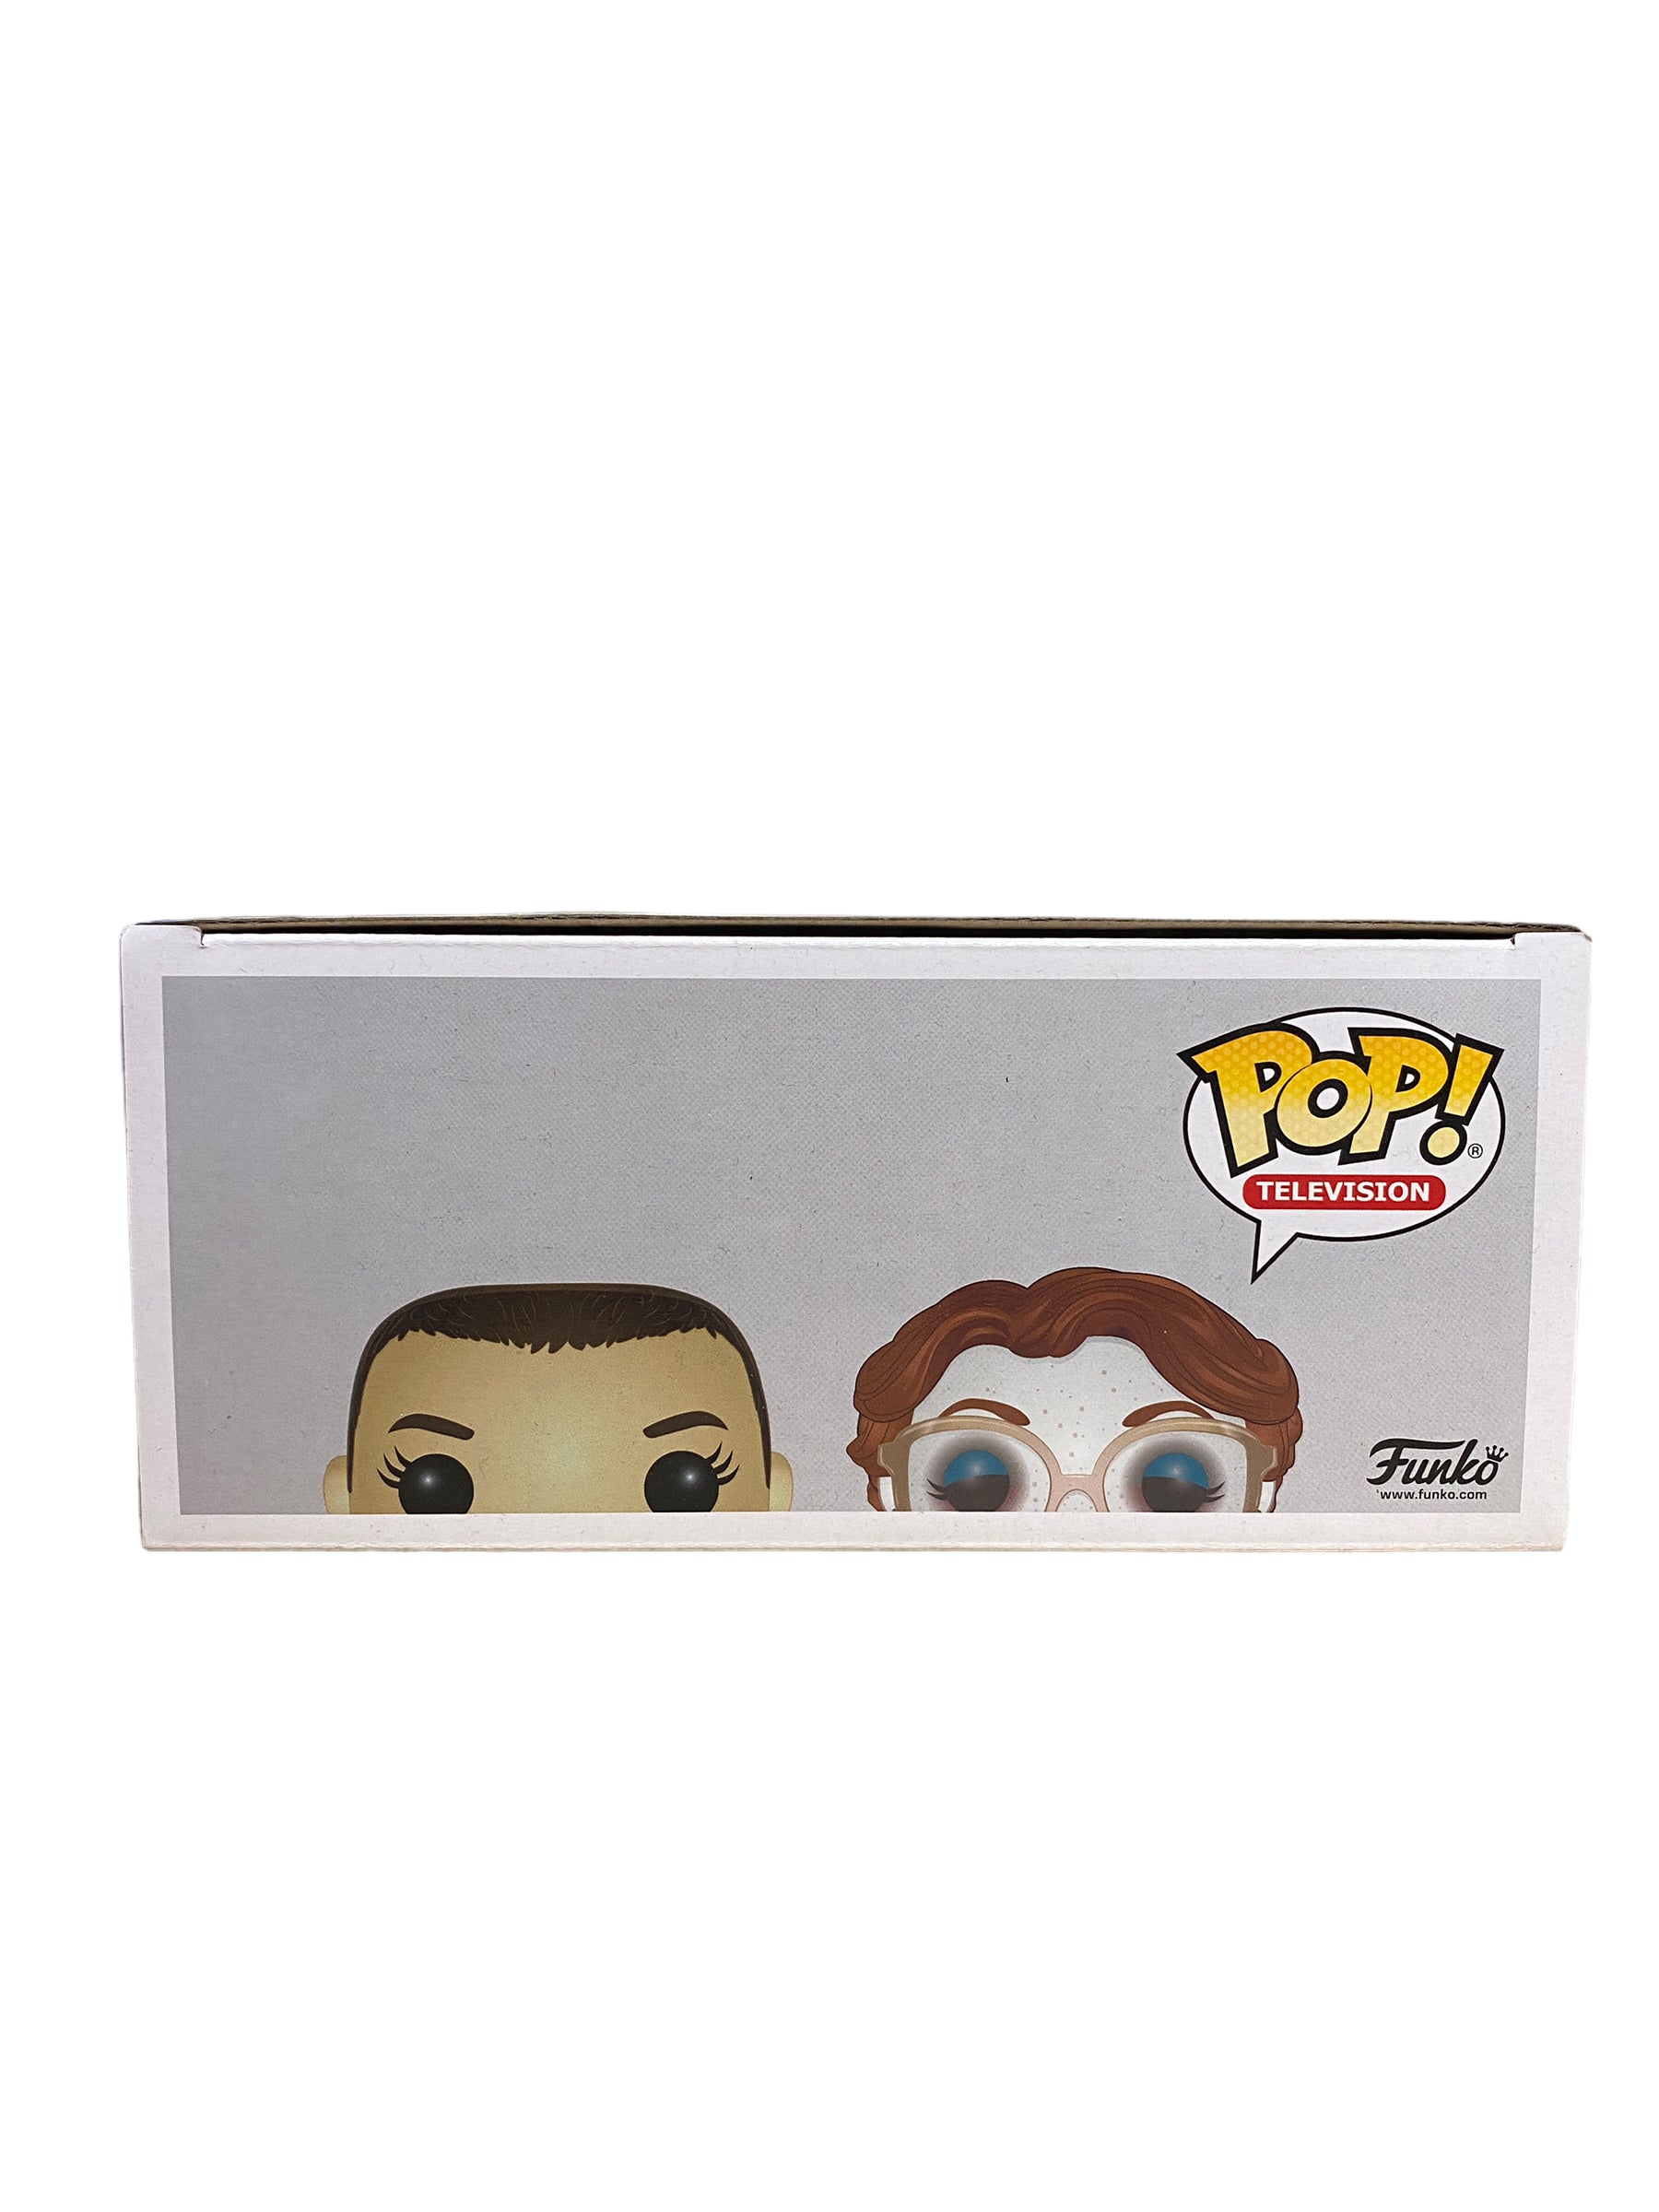 Upside Down Eleven / Barb 2 Pack Funko Pop! - Stranger Things - ECCC 2017 Shared Exclusive - Condition 8.5/10